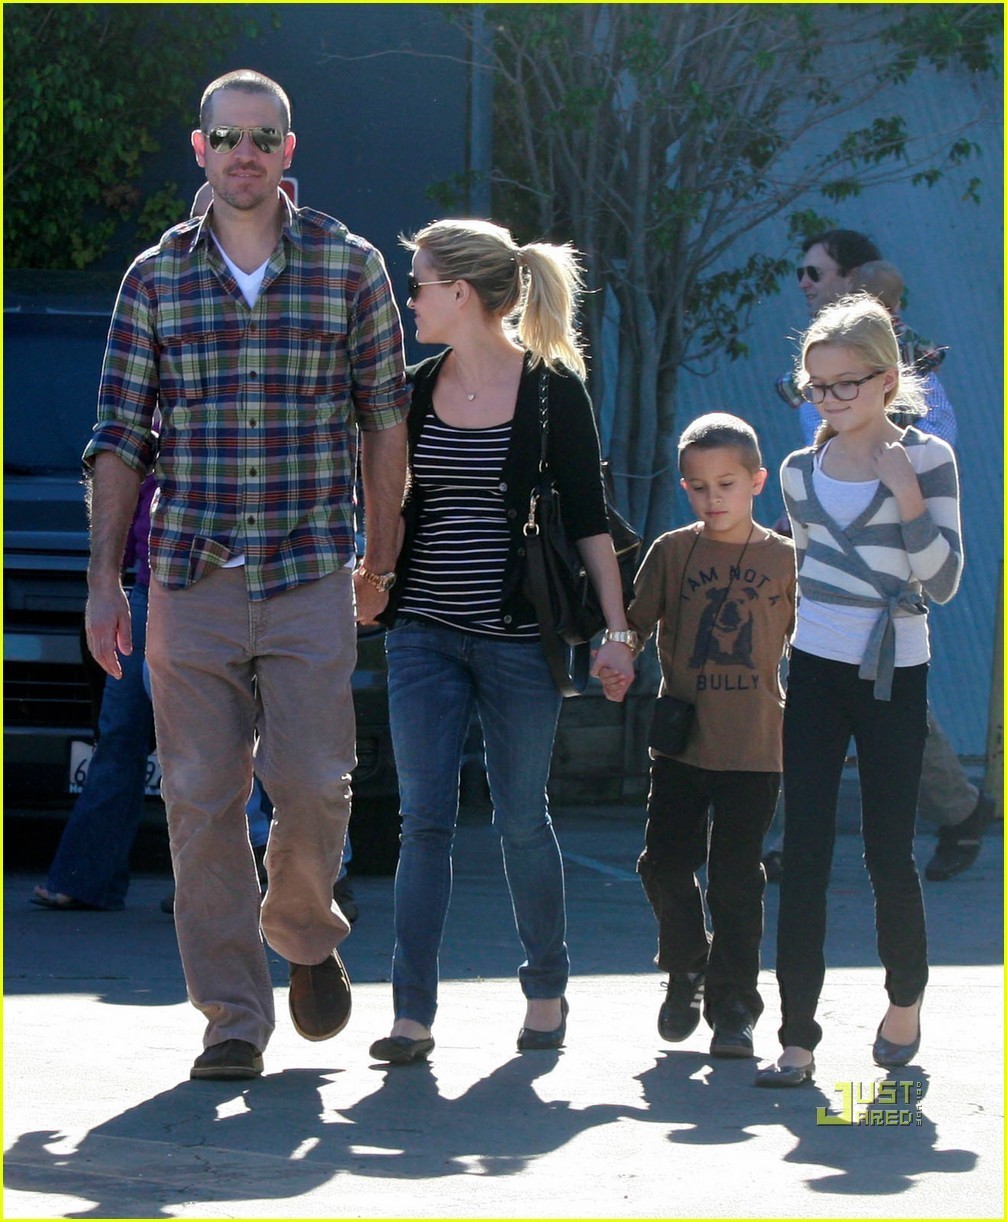 Reese-Witherspoon-Church-with-Ava-Deacon-and-Jim-Toth-reese-witherspoon-17680518-1007-1222